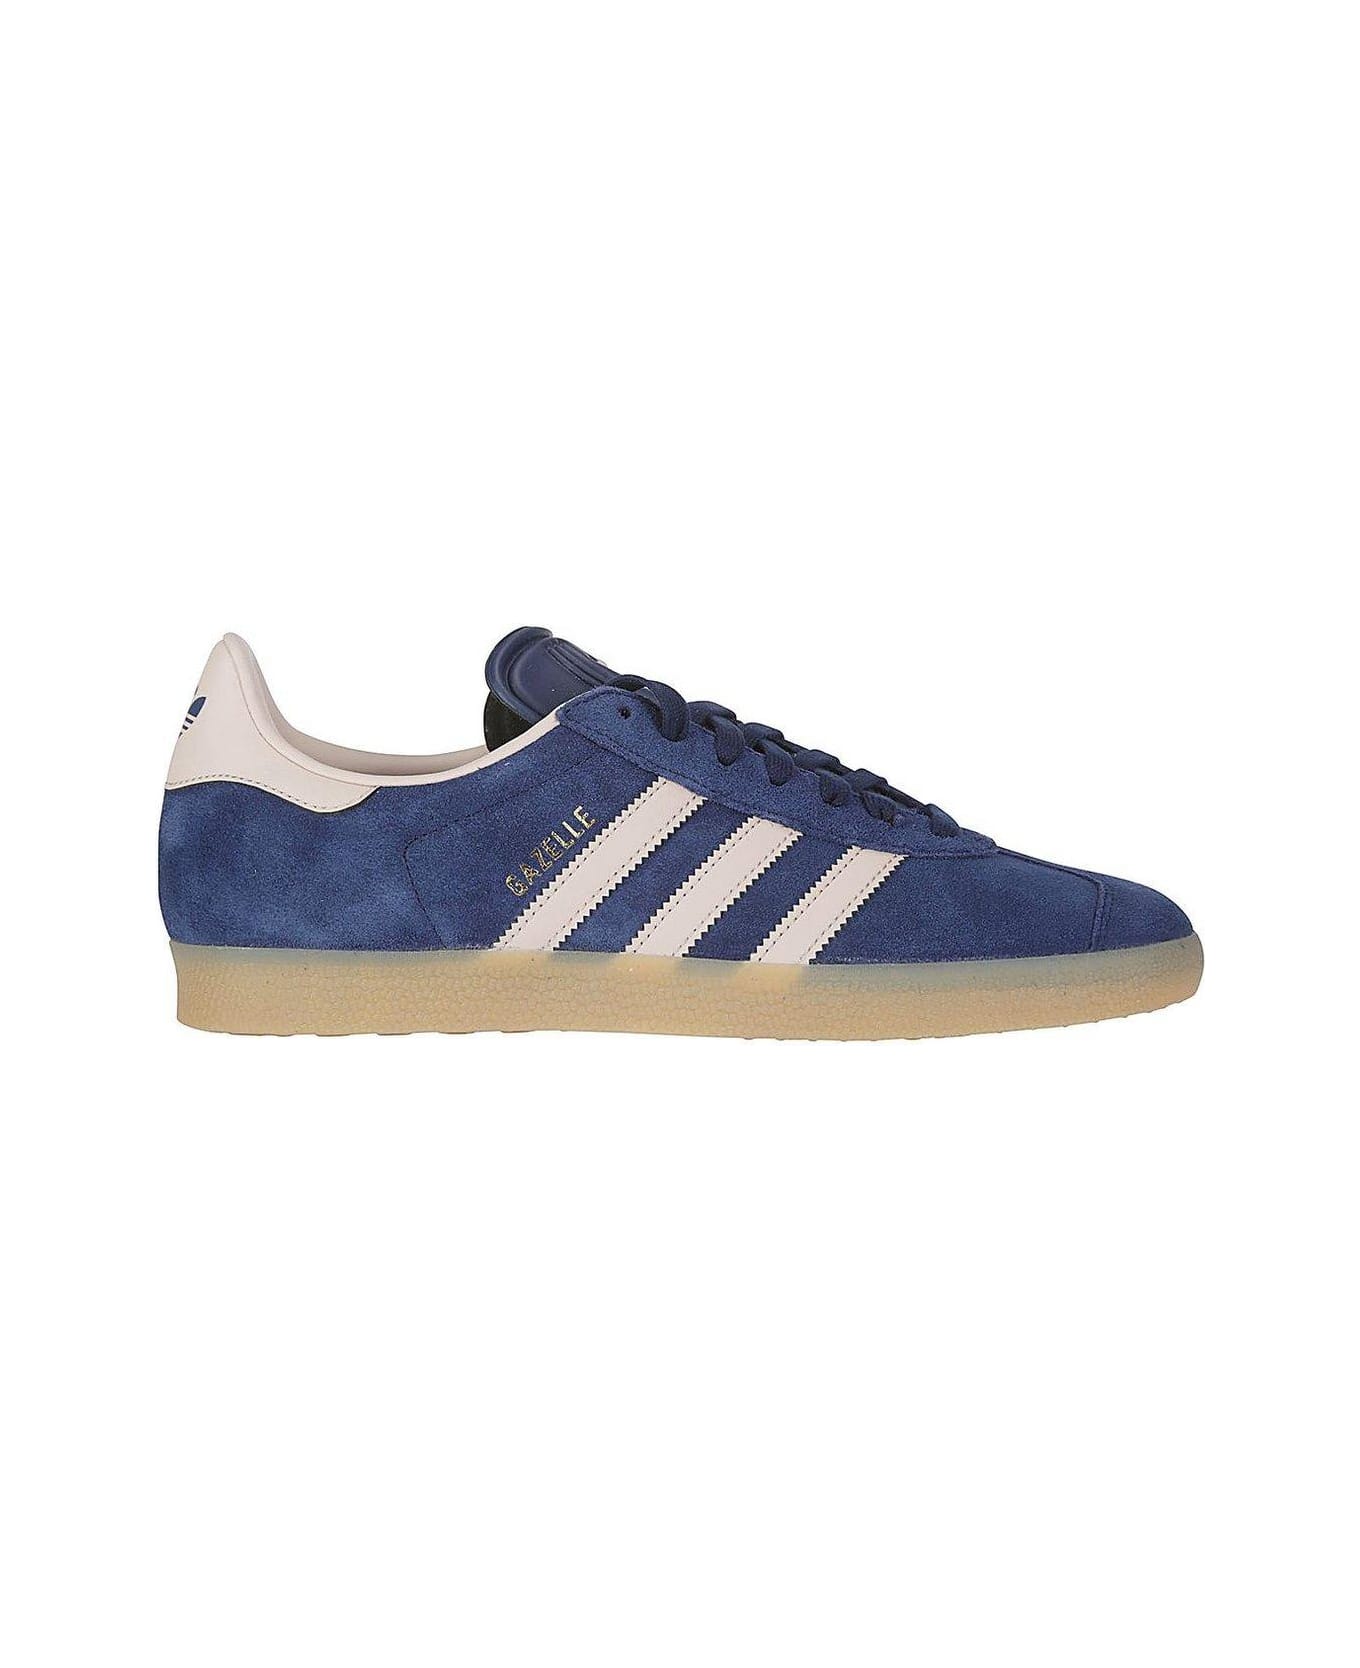 Adidas Gazelle Lace-up Sneakers - NAVY